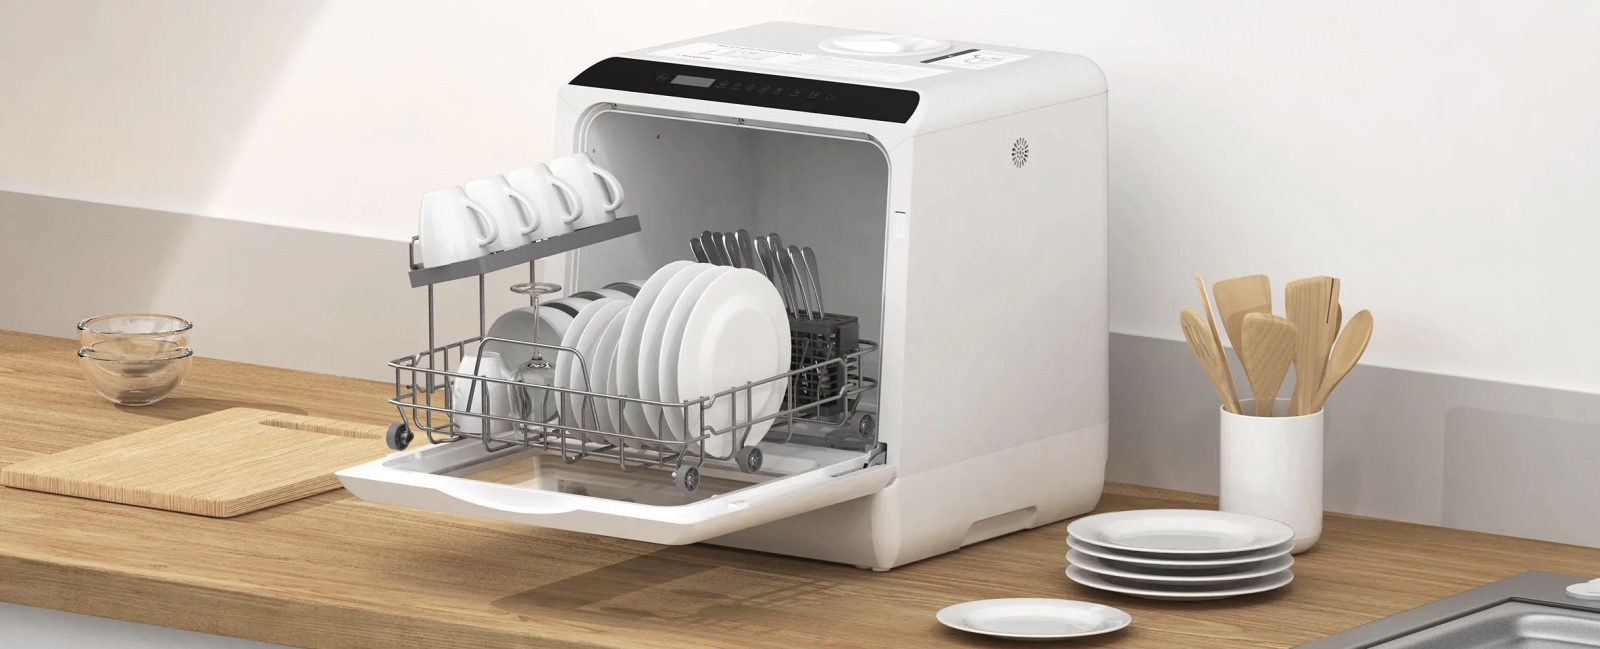 HAVA-R01-Countertop-Dishwasher-Review